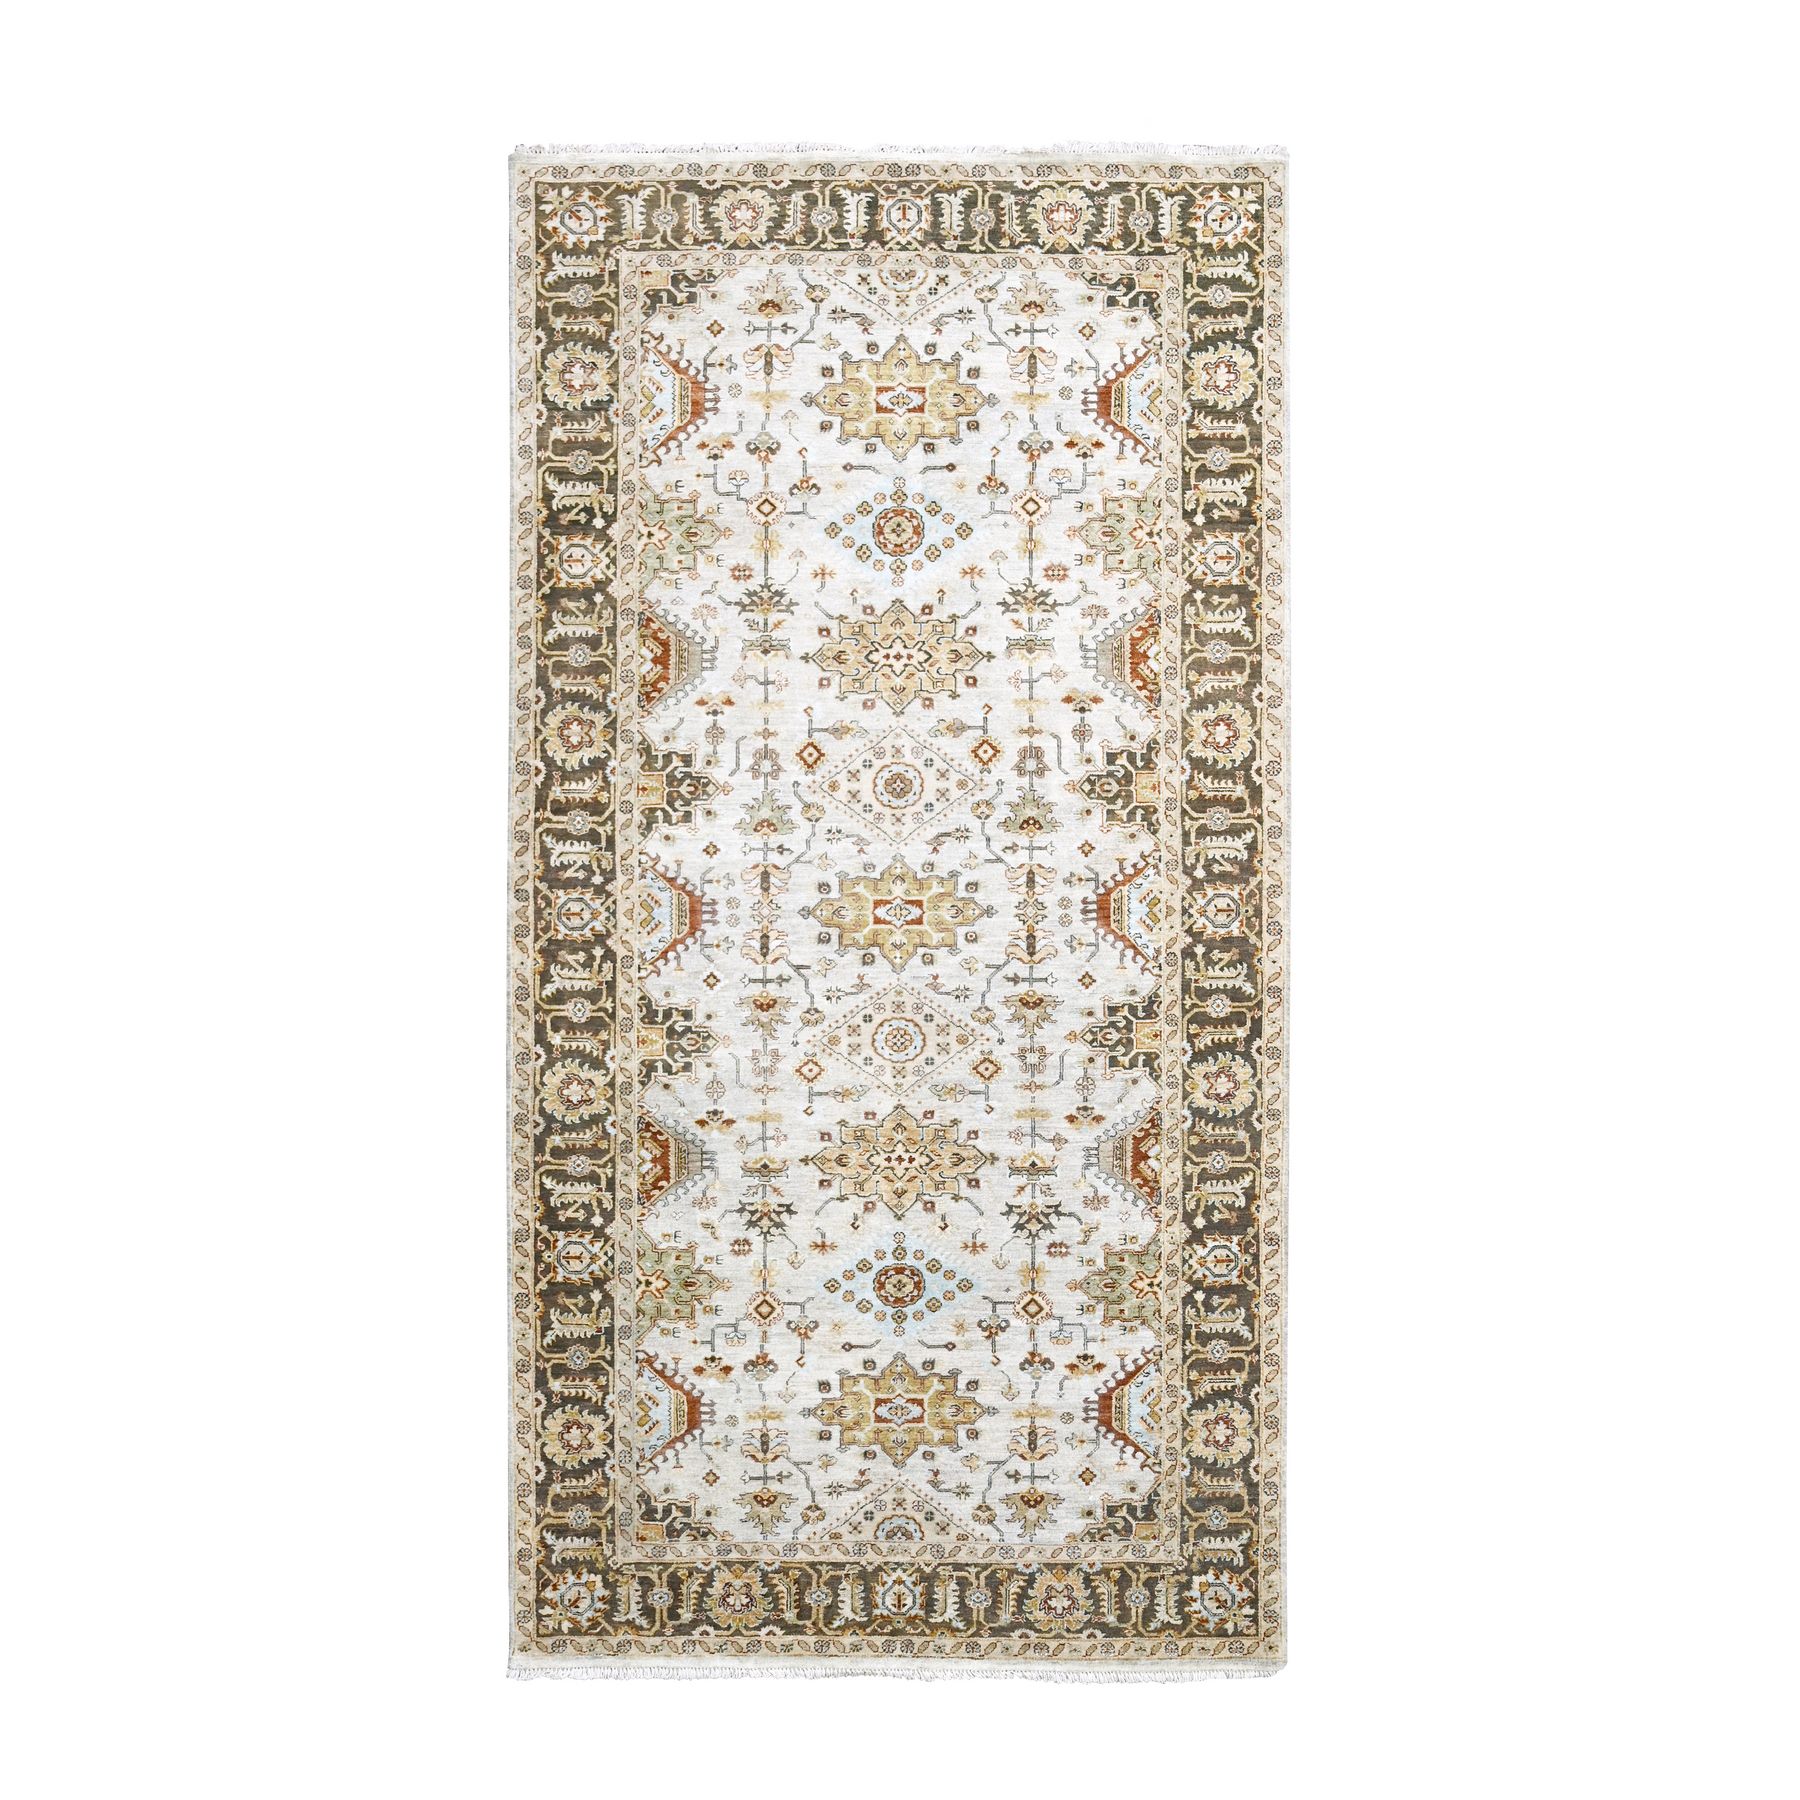  Wool Hand-Knotted Area Rug 6'1